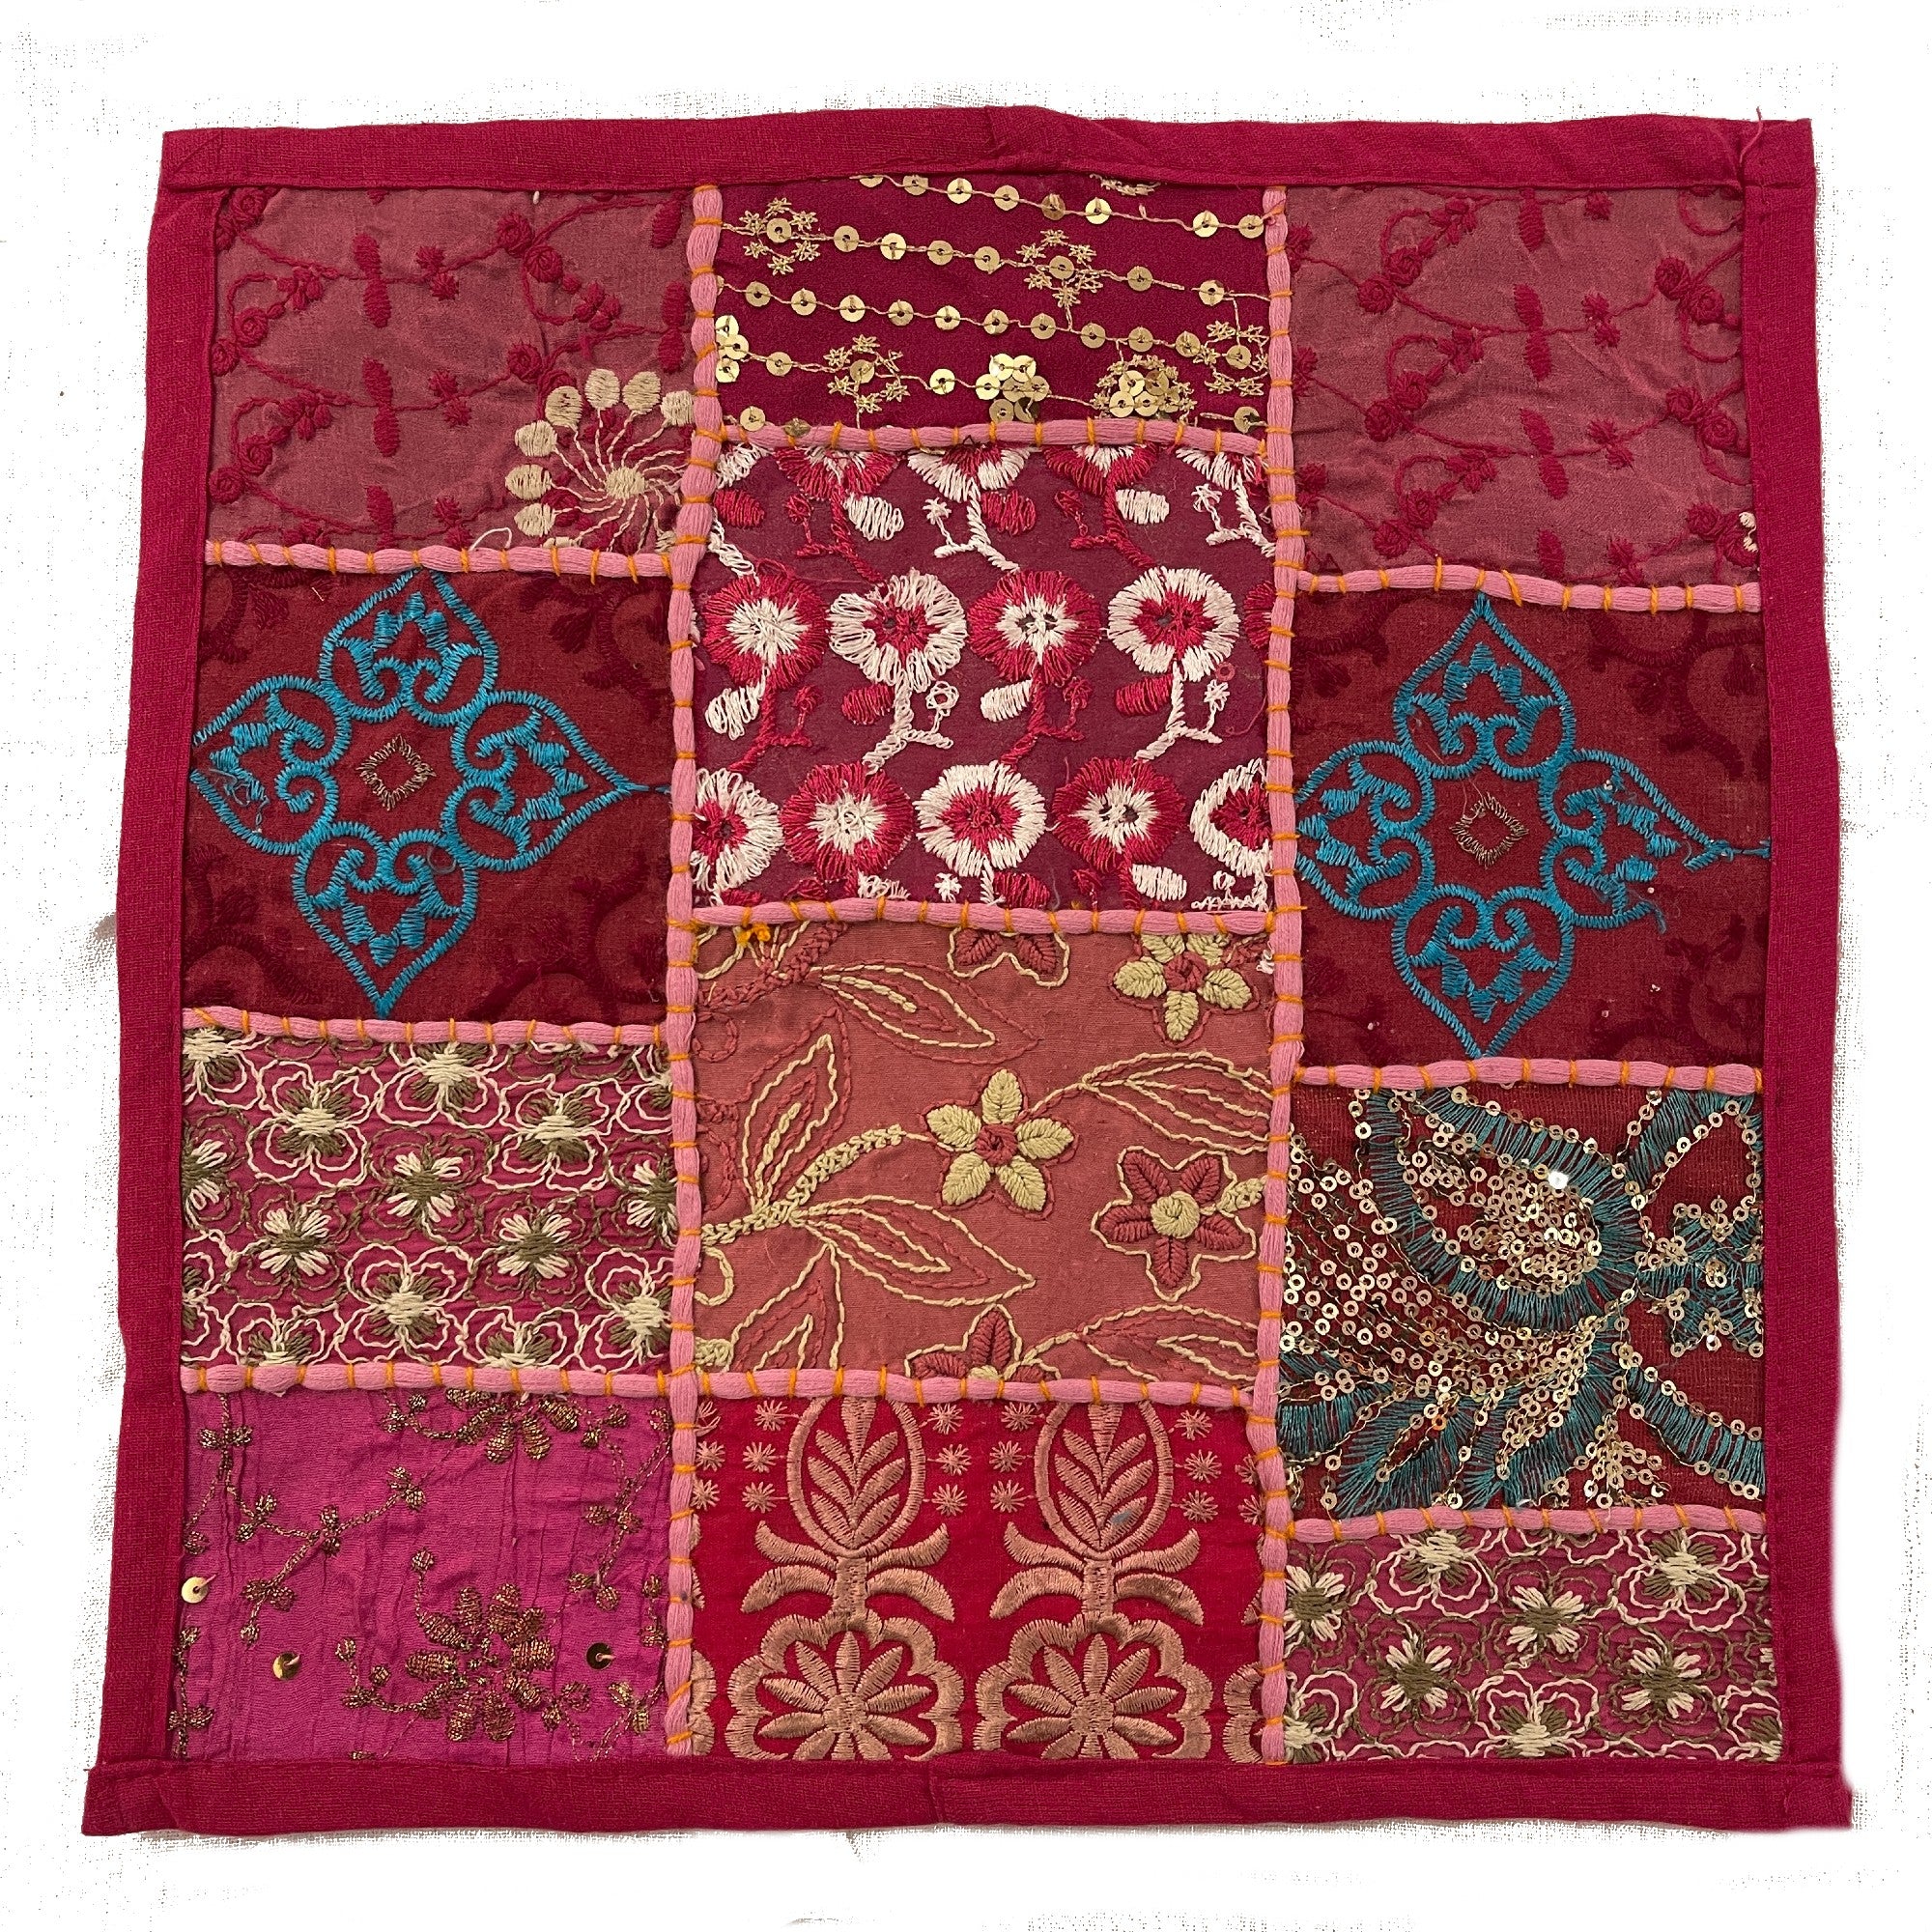 Handmade Dark Pink Patchwork Pillowcovers - 3 Styles - Vintage India NYC